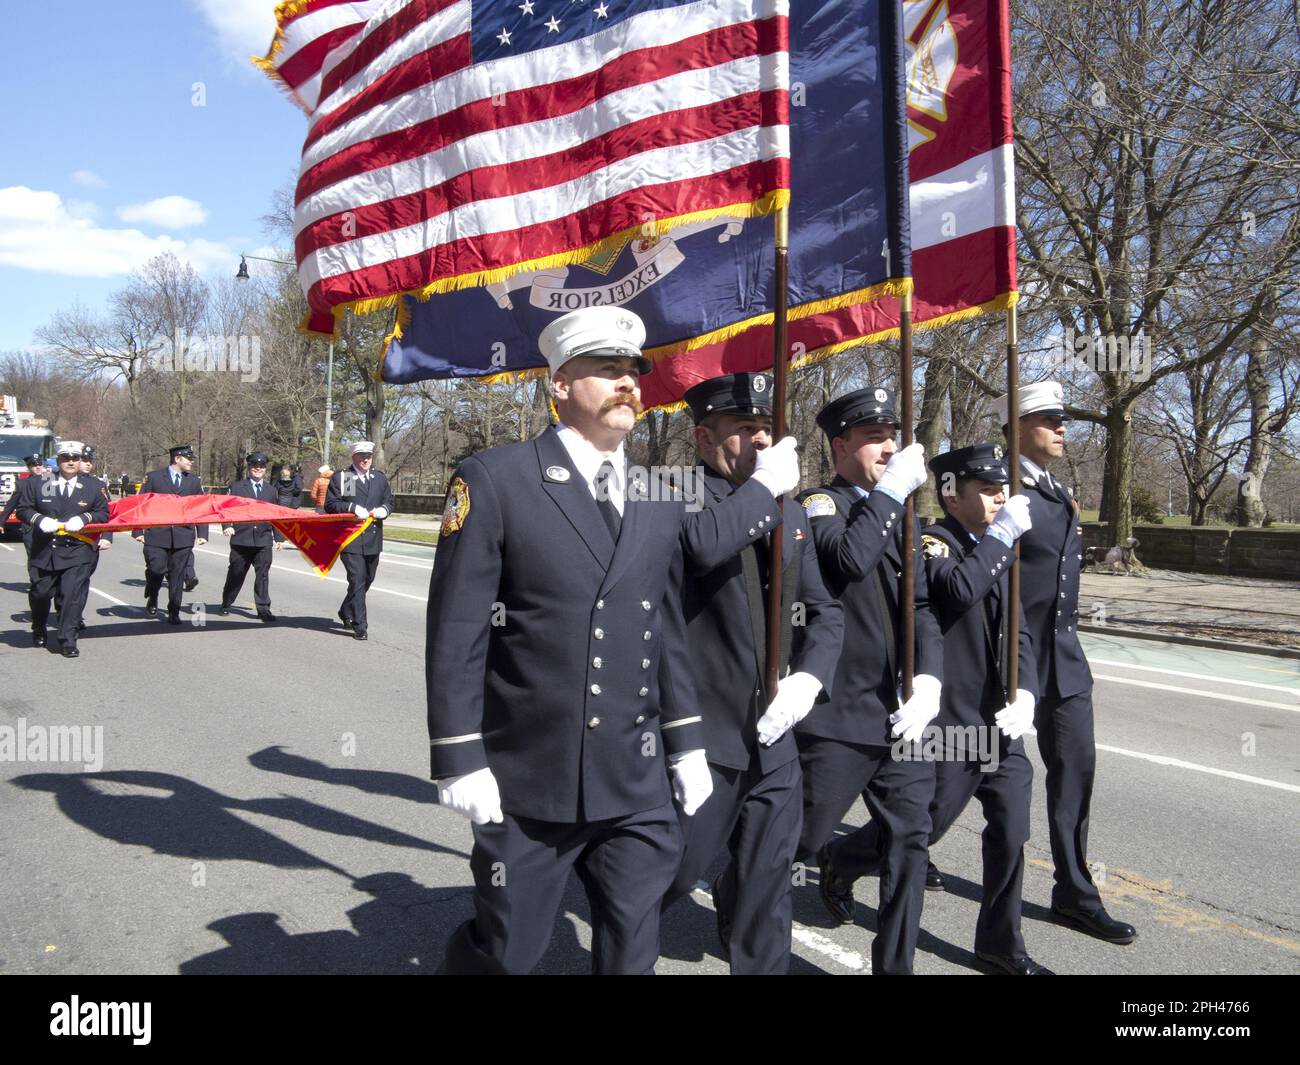 Members of FDNY march in St.Patrick's Day Parade in Park Slope, Brooklyn, NY Stock Photo